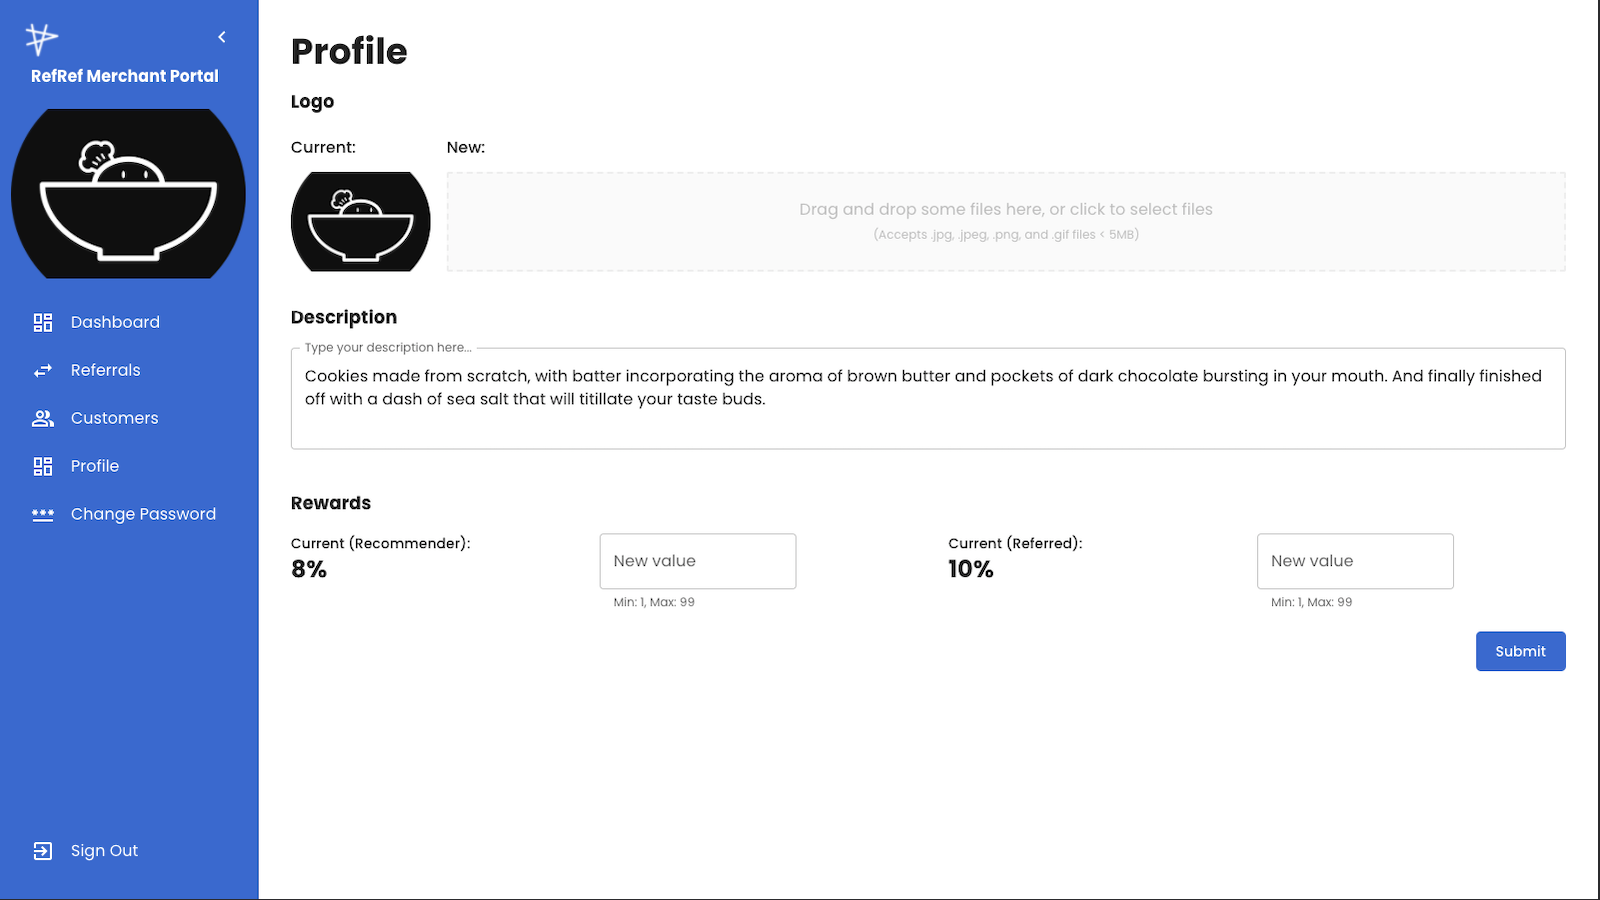 Quickly edit your brand's details in the marketplace